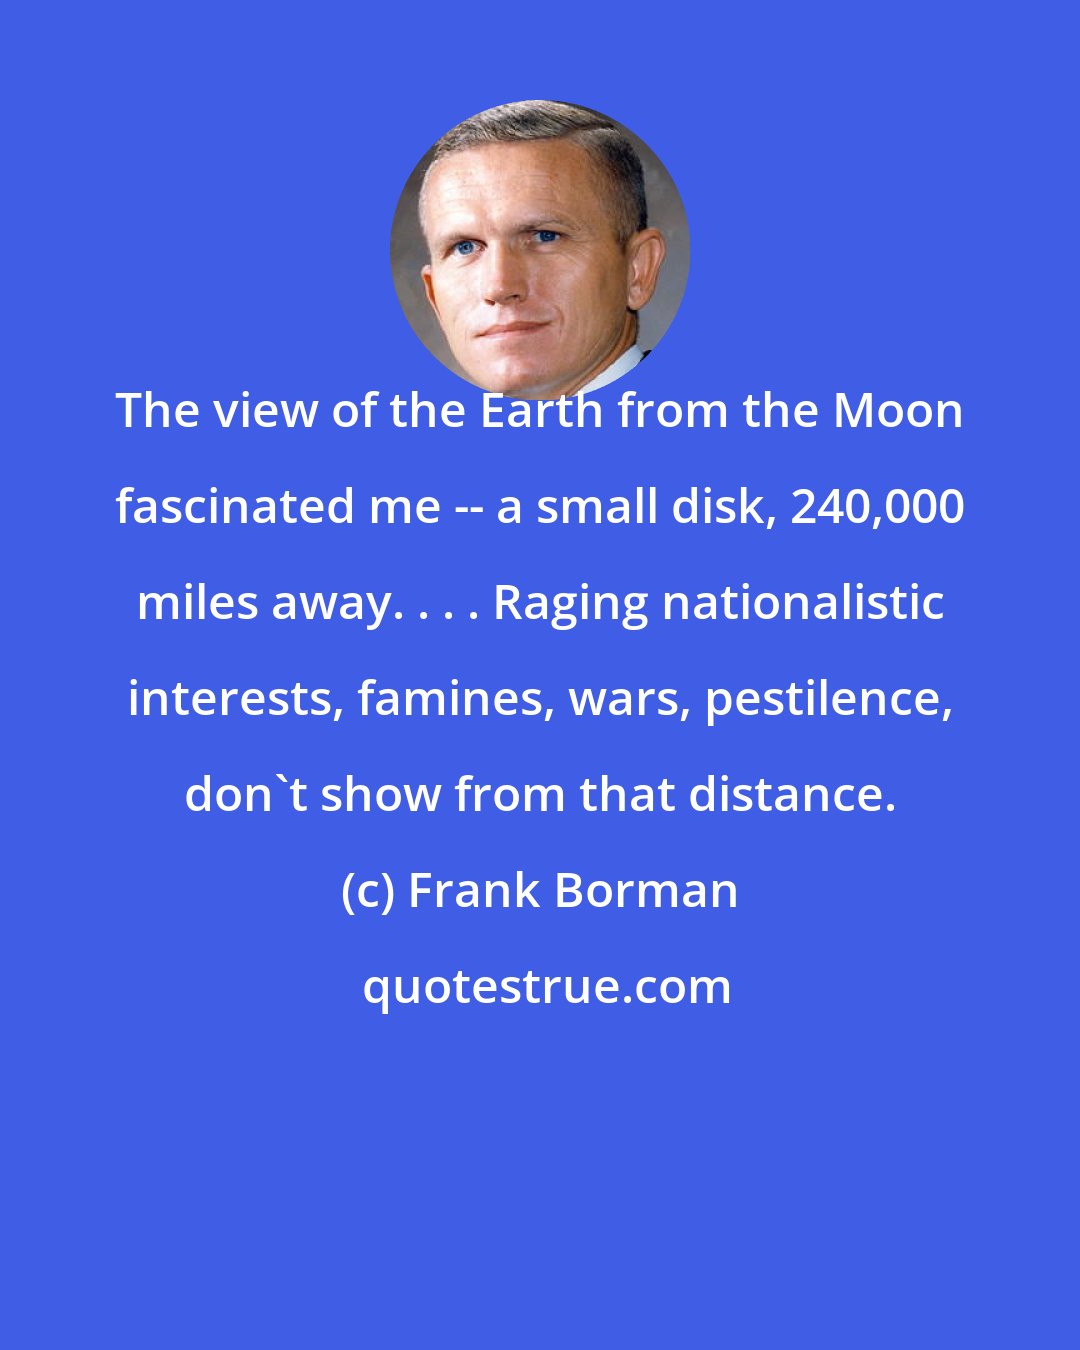 Frank Borman: The view of the Earth from the Moon fascinated me -- a small disk, 240,000 miles away. . . . Raging nationalistic interests, famines, wars, pestilence, don't show from that distance.